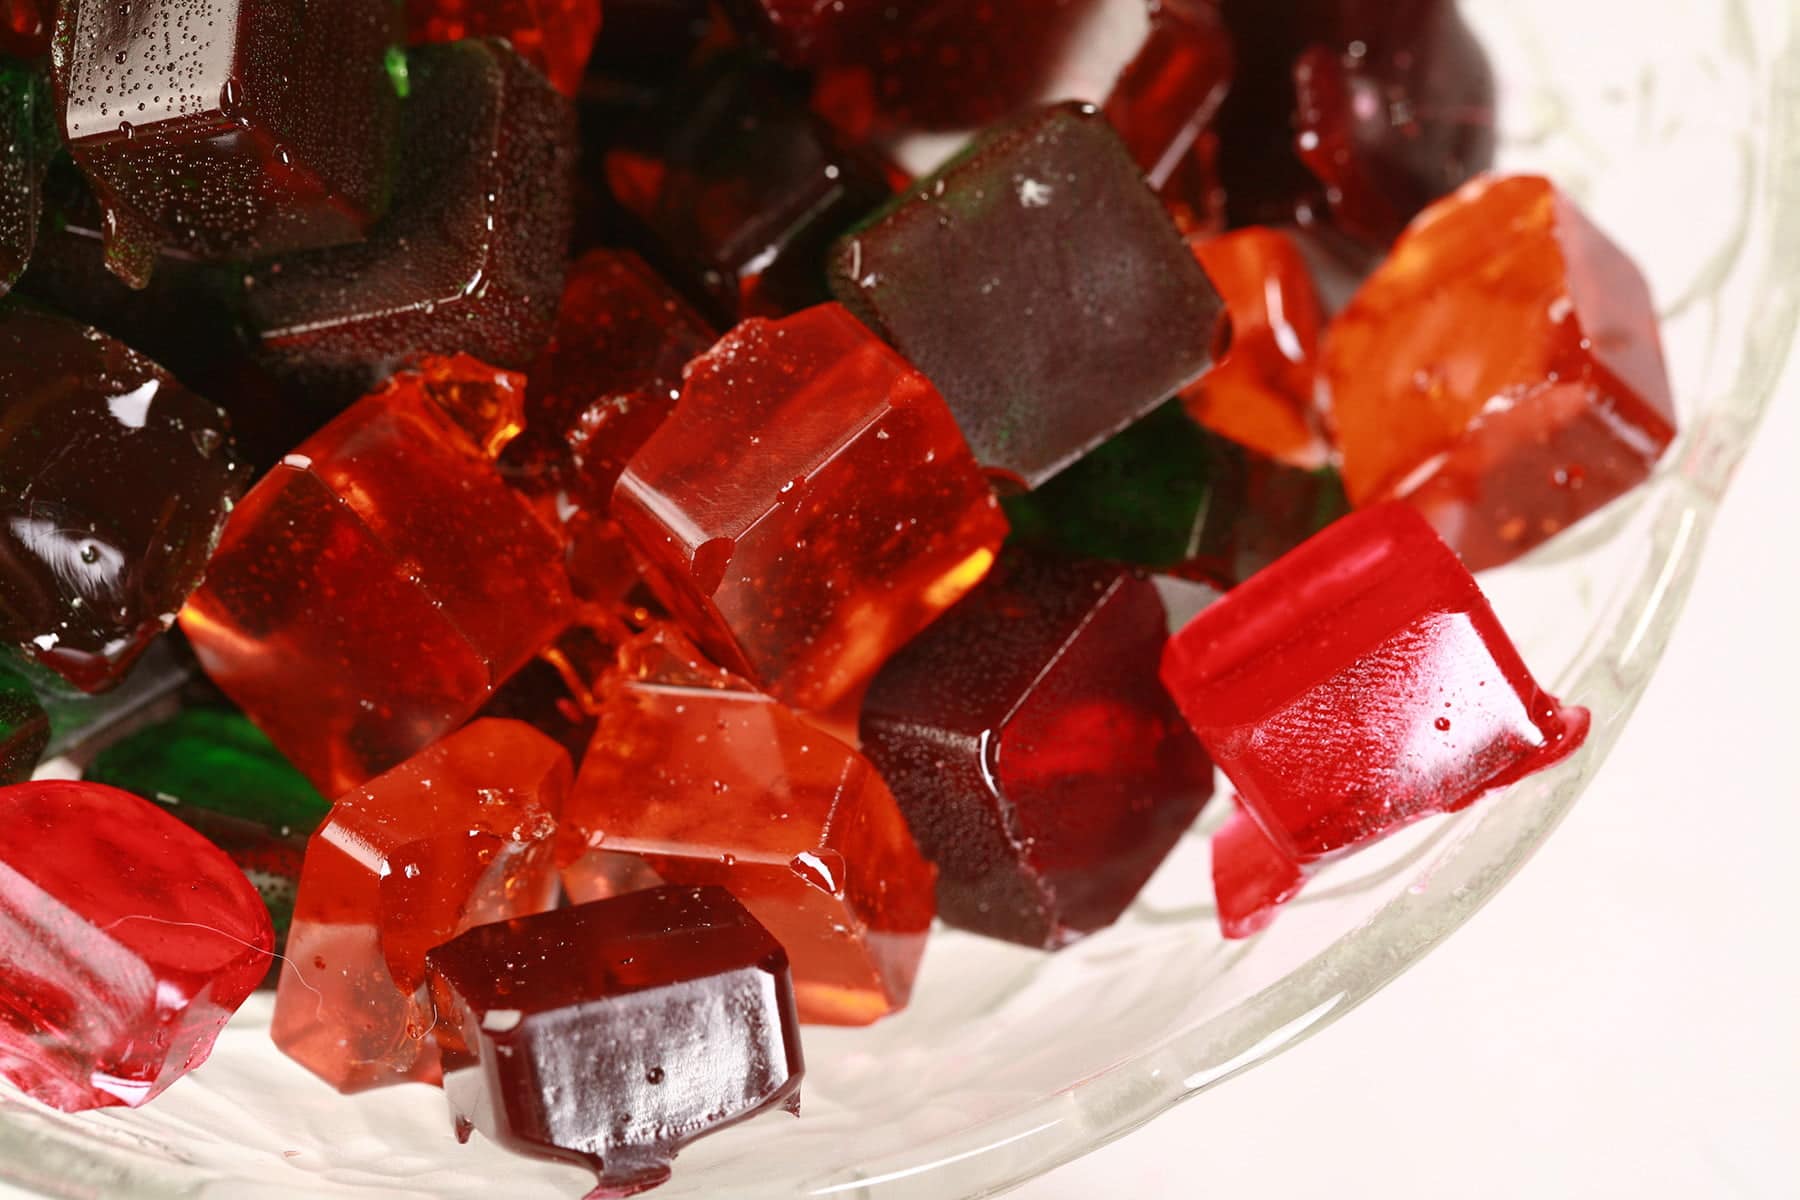 A glass bowl full of homemade jolly rancher candy -clear square shaped hard candy in orange, red, green, and purple